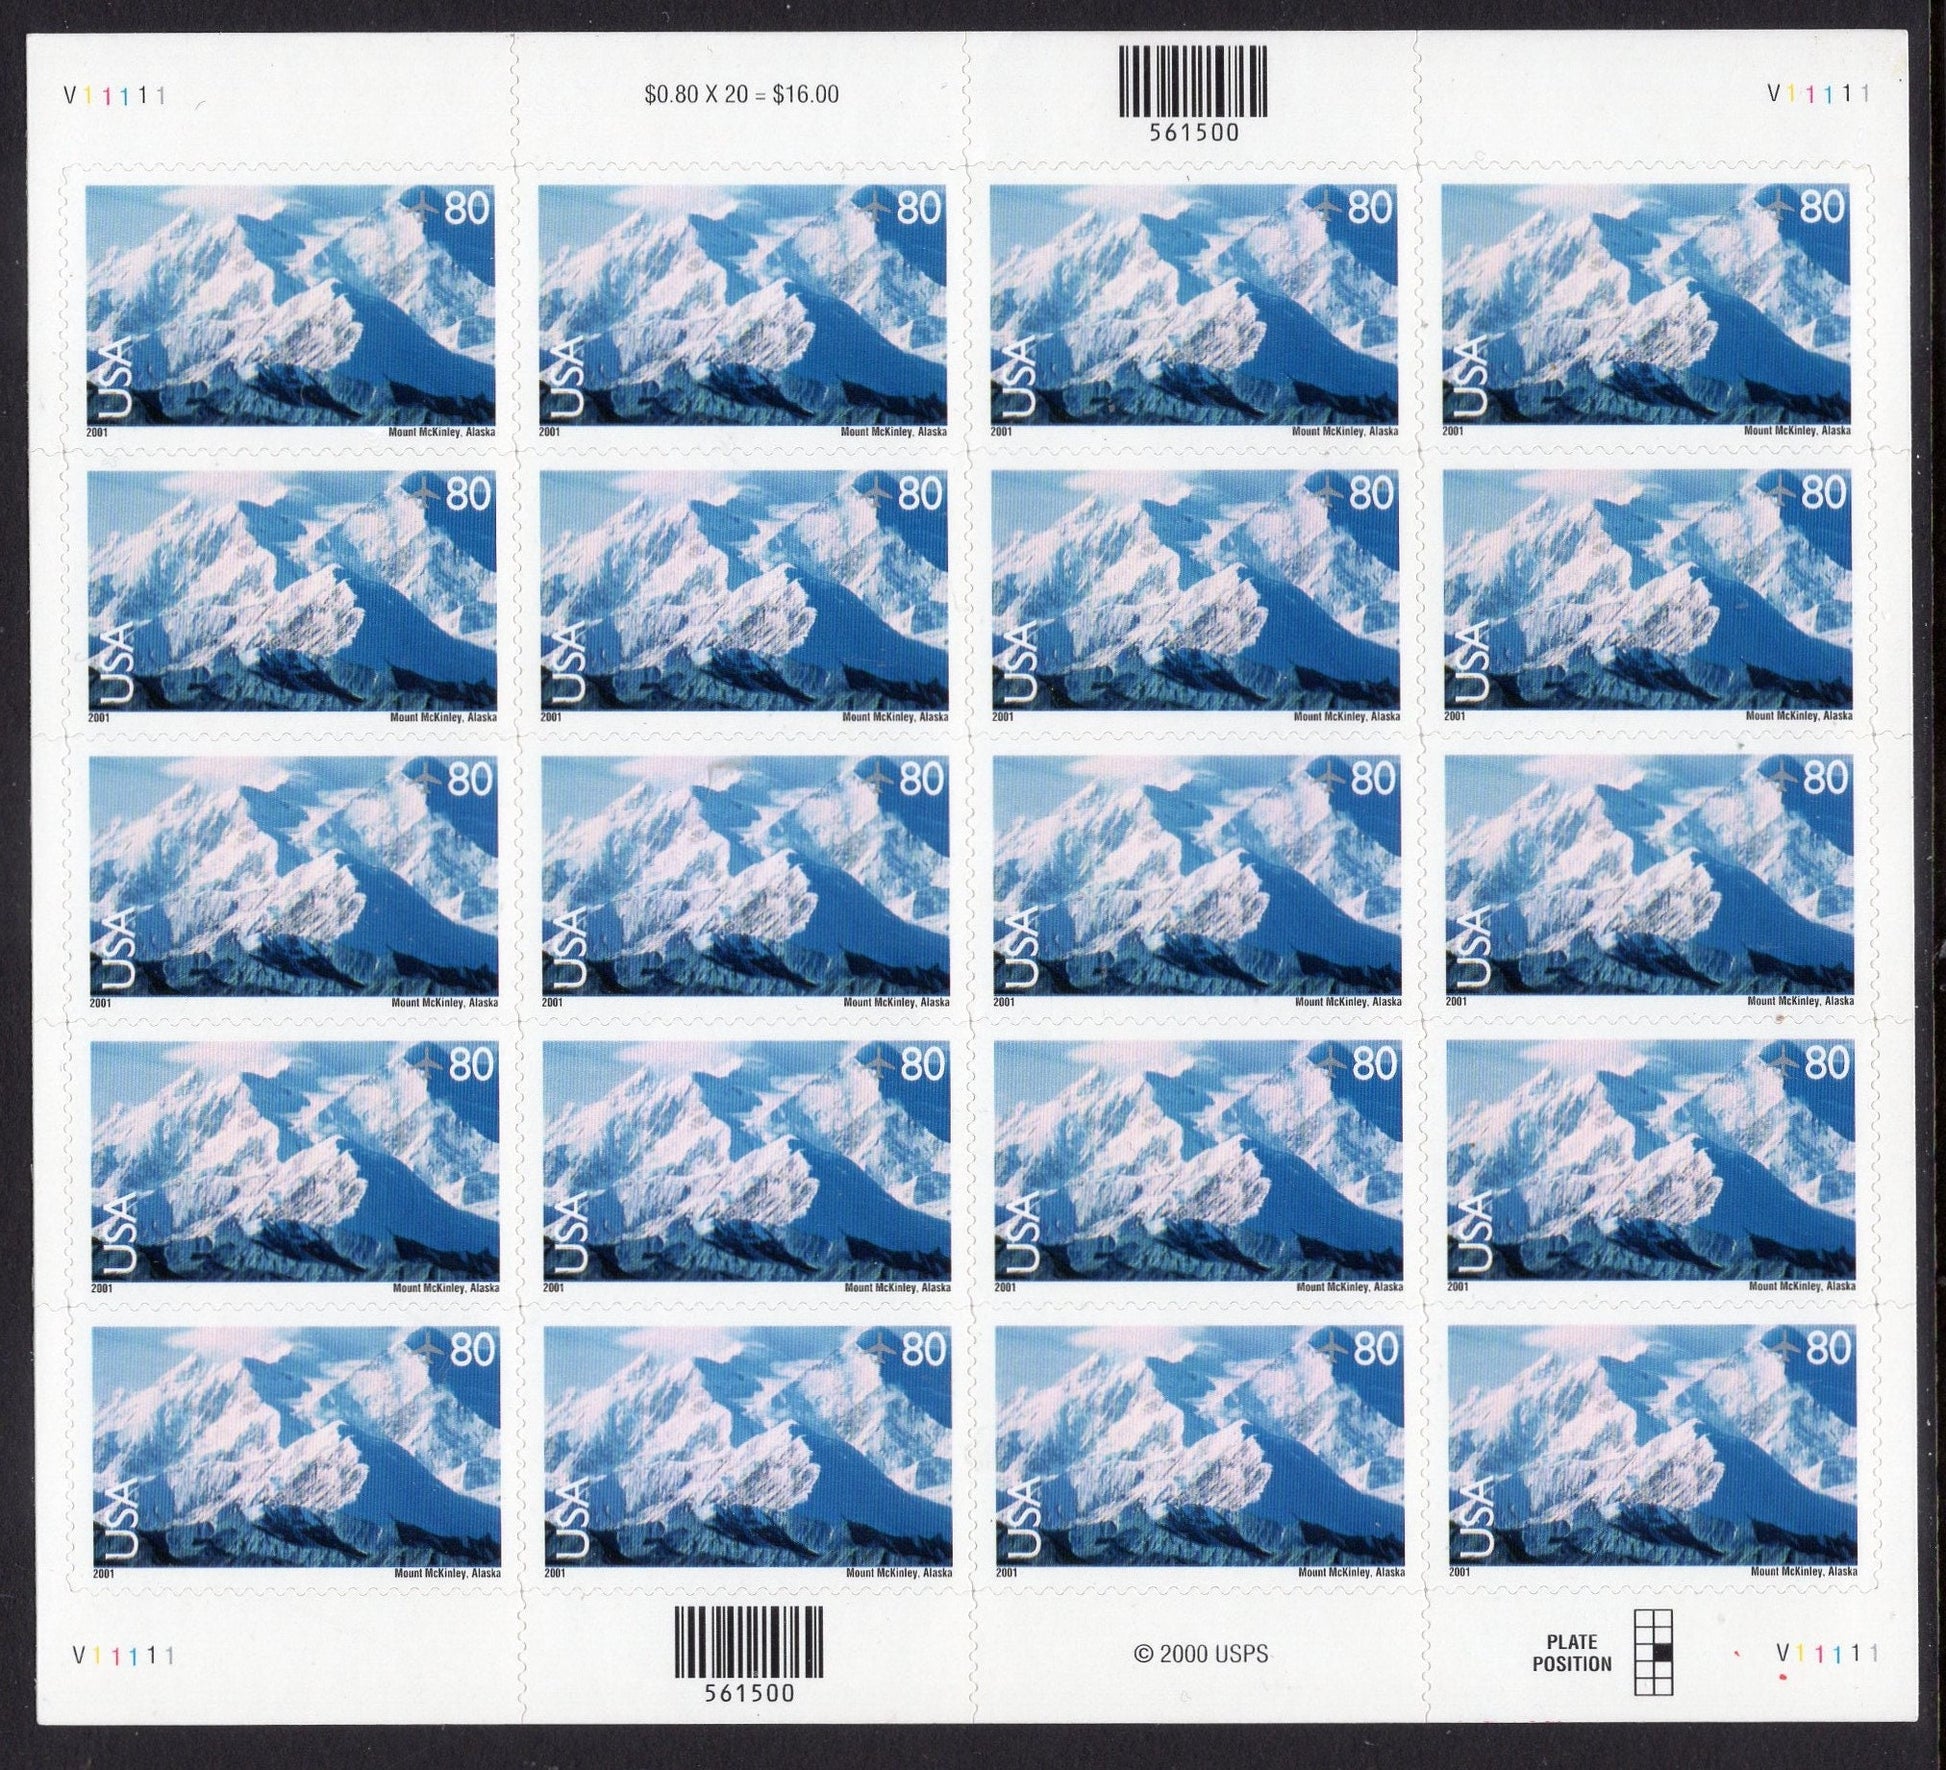 Mt McKINLEY NATIONAL PARK Alaska Sheet of 20 Scenic USA Landscapes Stamps - Unused, Fresh, Bright - Issued in 2009 - sC137-